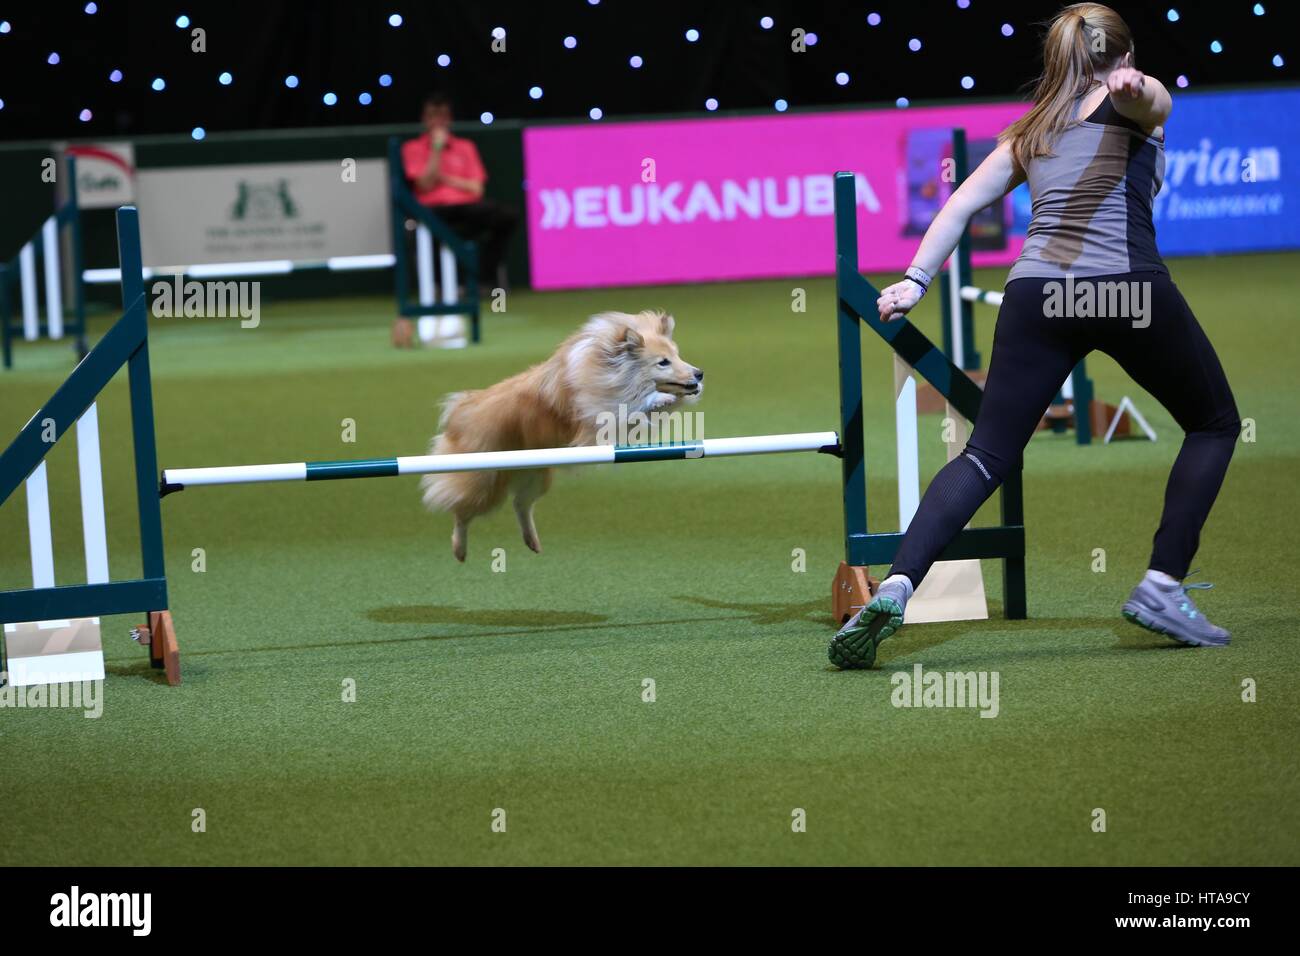 Crufts, Birmingham, UK. 9th Mar, 2017. The world's largest dog show, Crufts, takes place in Birmingham with dogs of all shapes & sizes. Credit: Jon Freeman/Alamy Live News Stock Photo